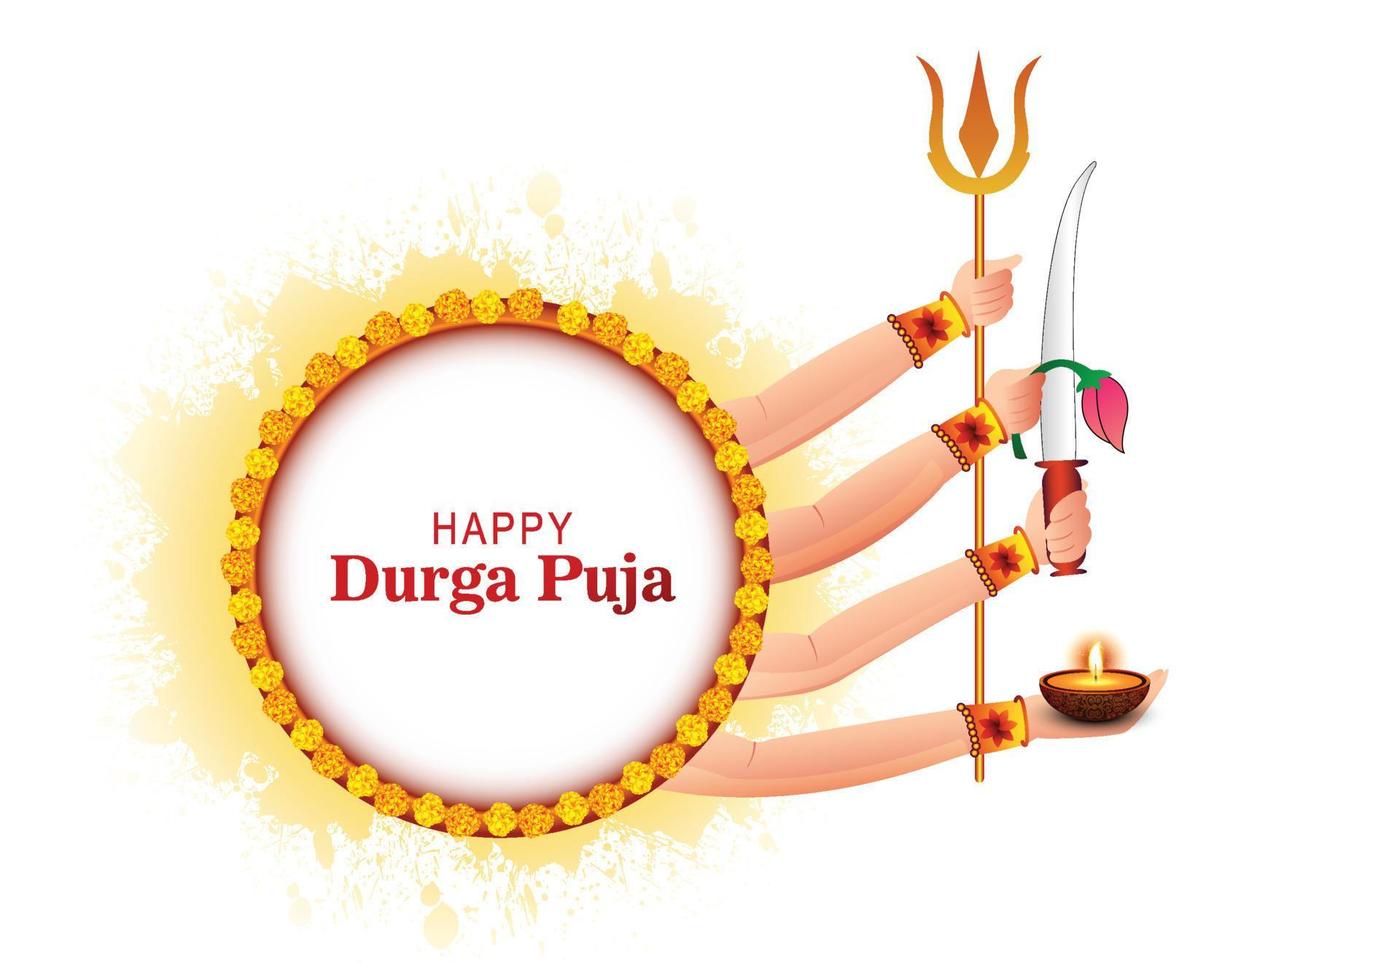 Happy durga puja religious indian festival traditional card background vector